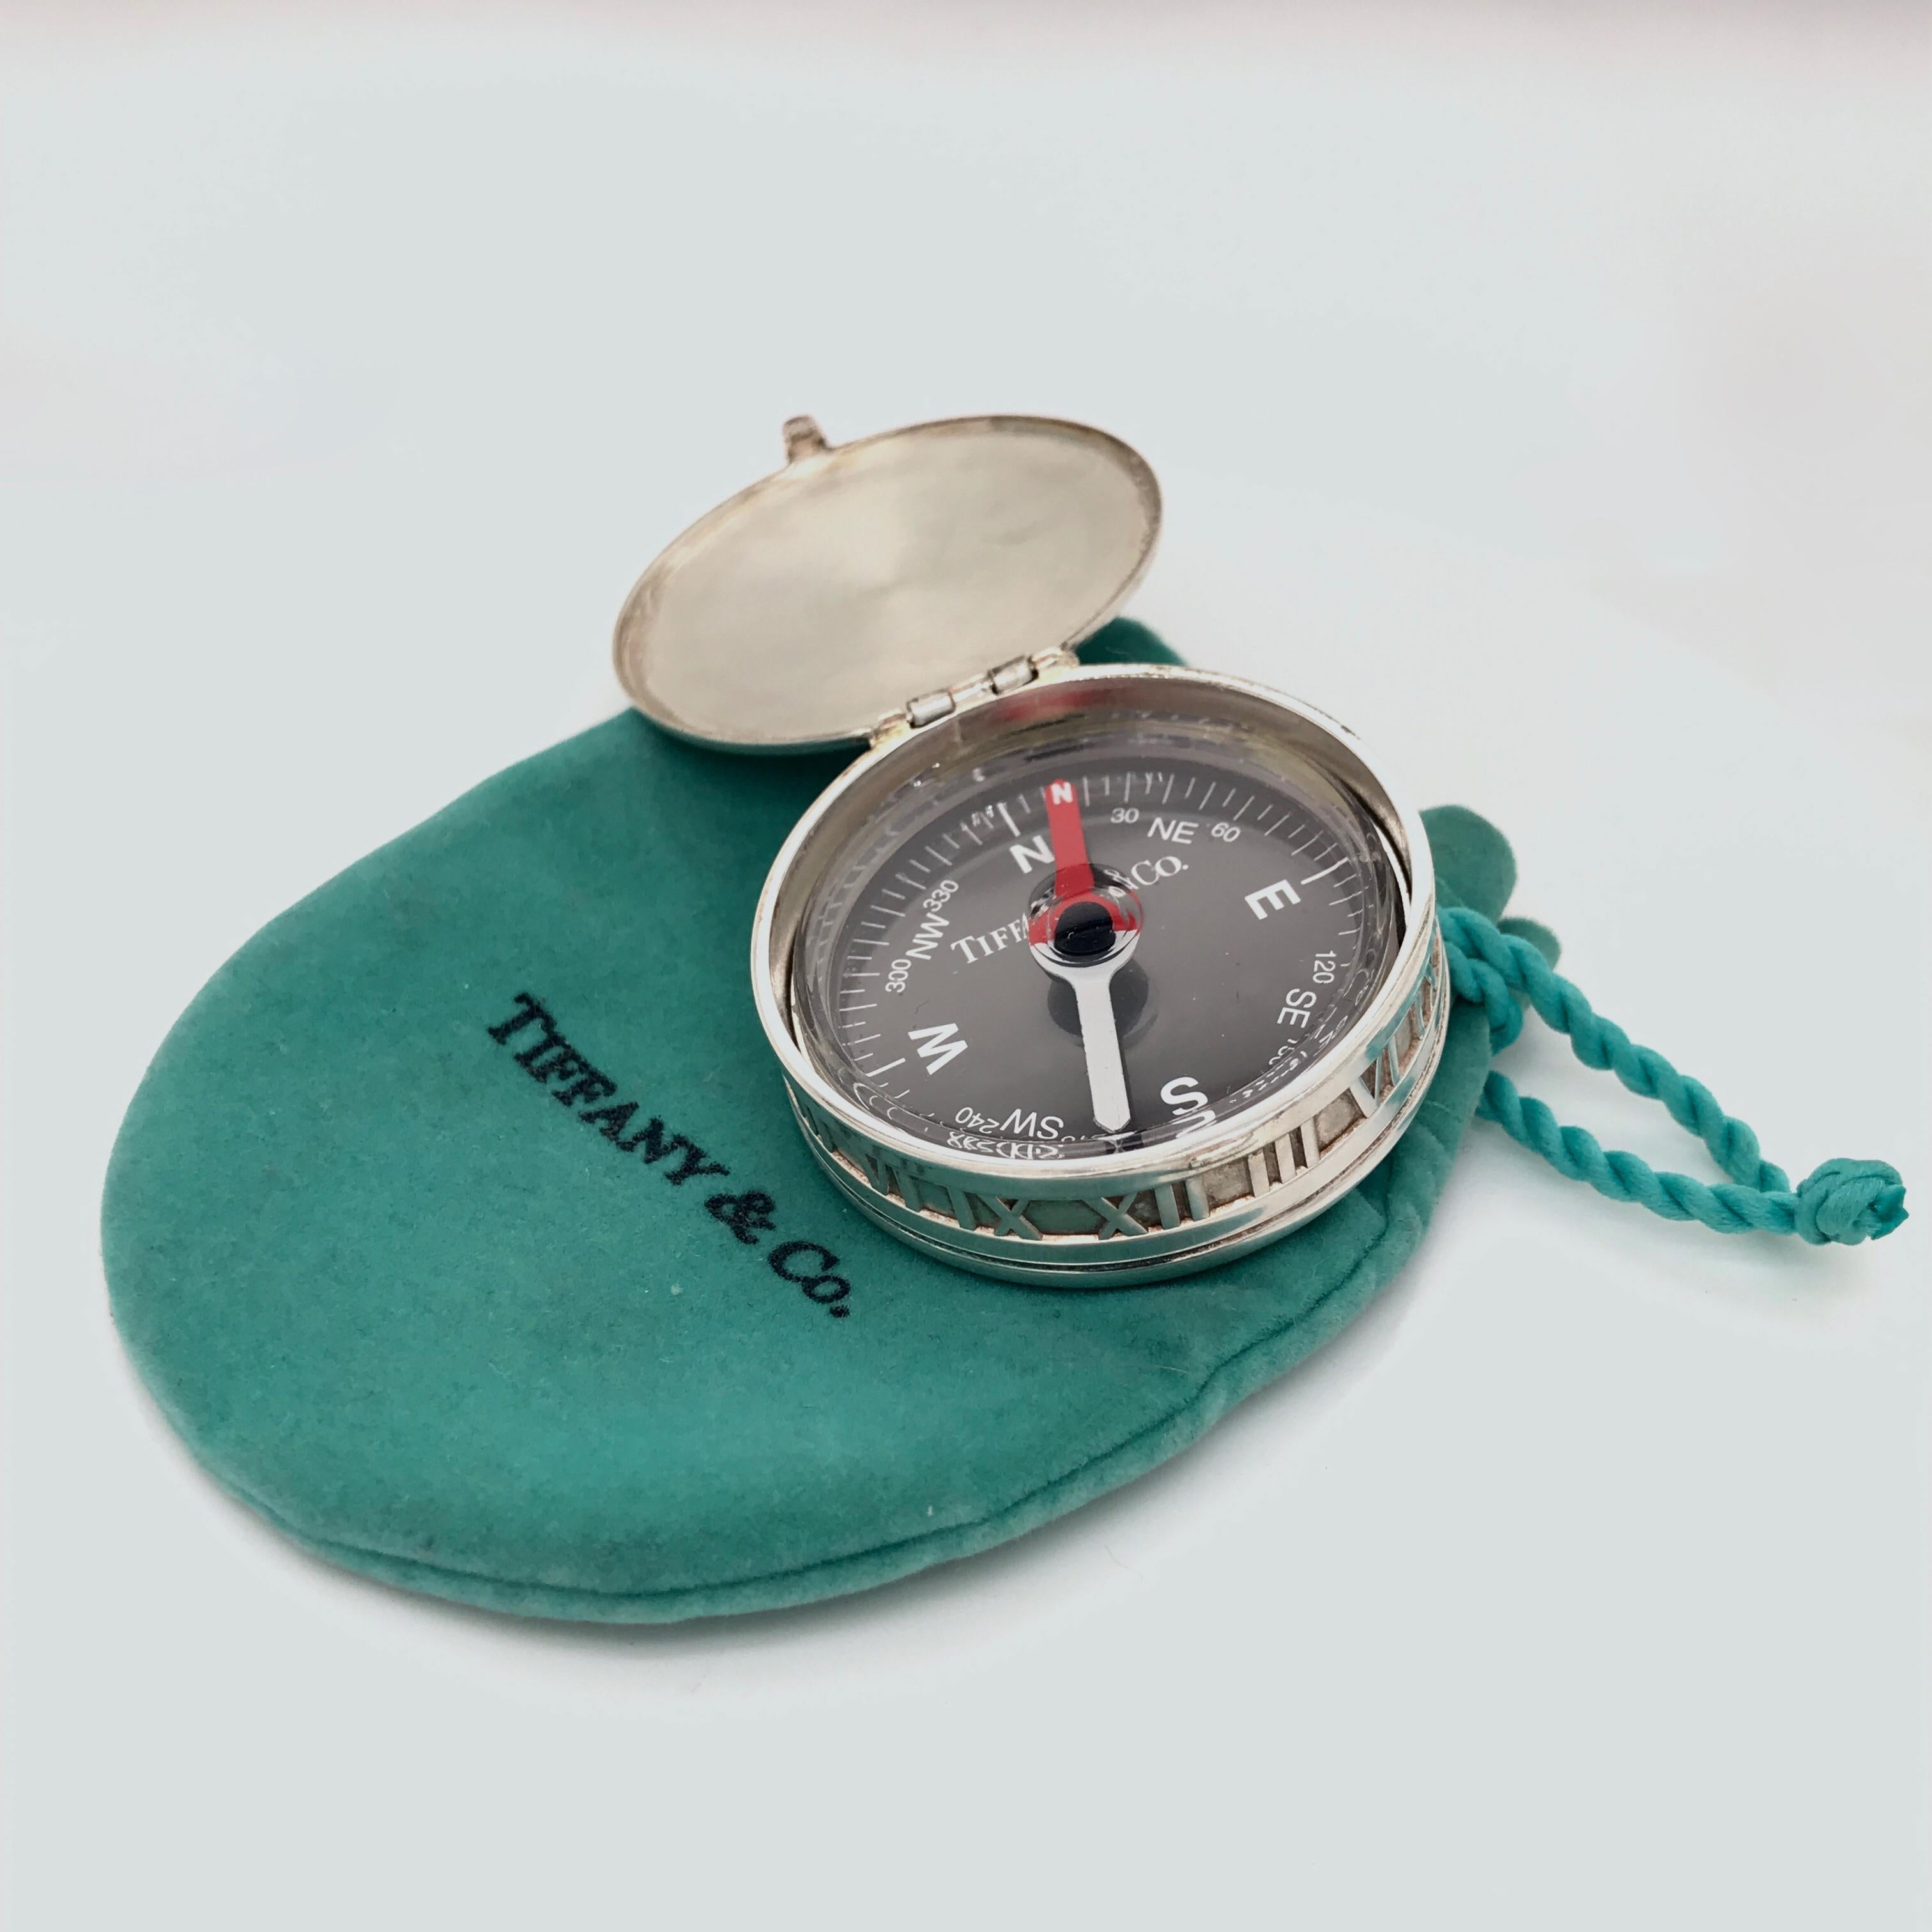 A very fine Tiffany sterling silver compass.

In the iconic Atlas pattern. 

The 'Atlas' collection was designed by John Loring in the 1980's. It has over time proven to be one of Tiffany's most popular and successful lines.   

Simply a great